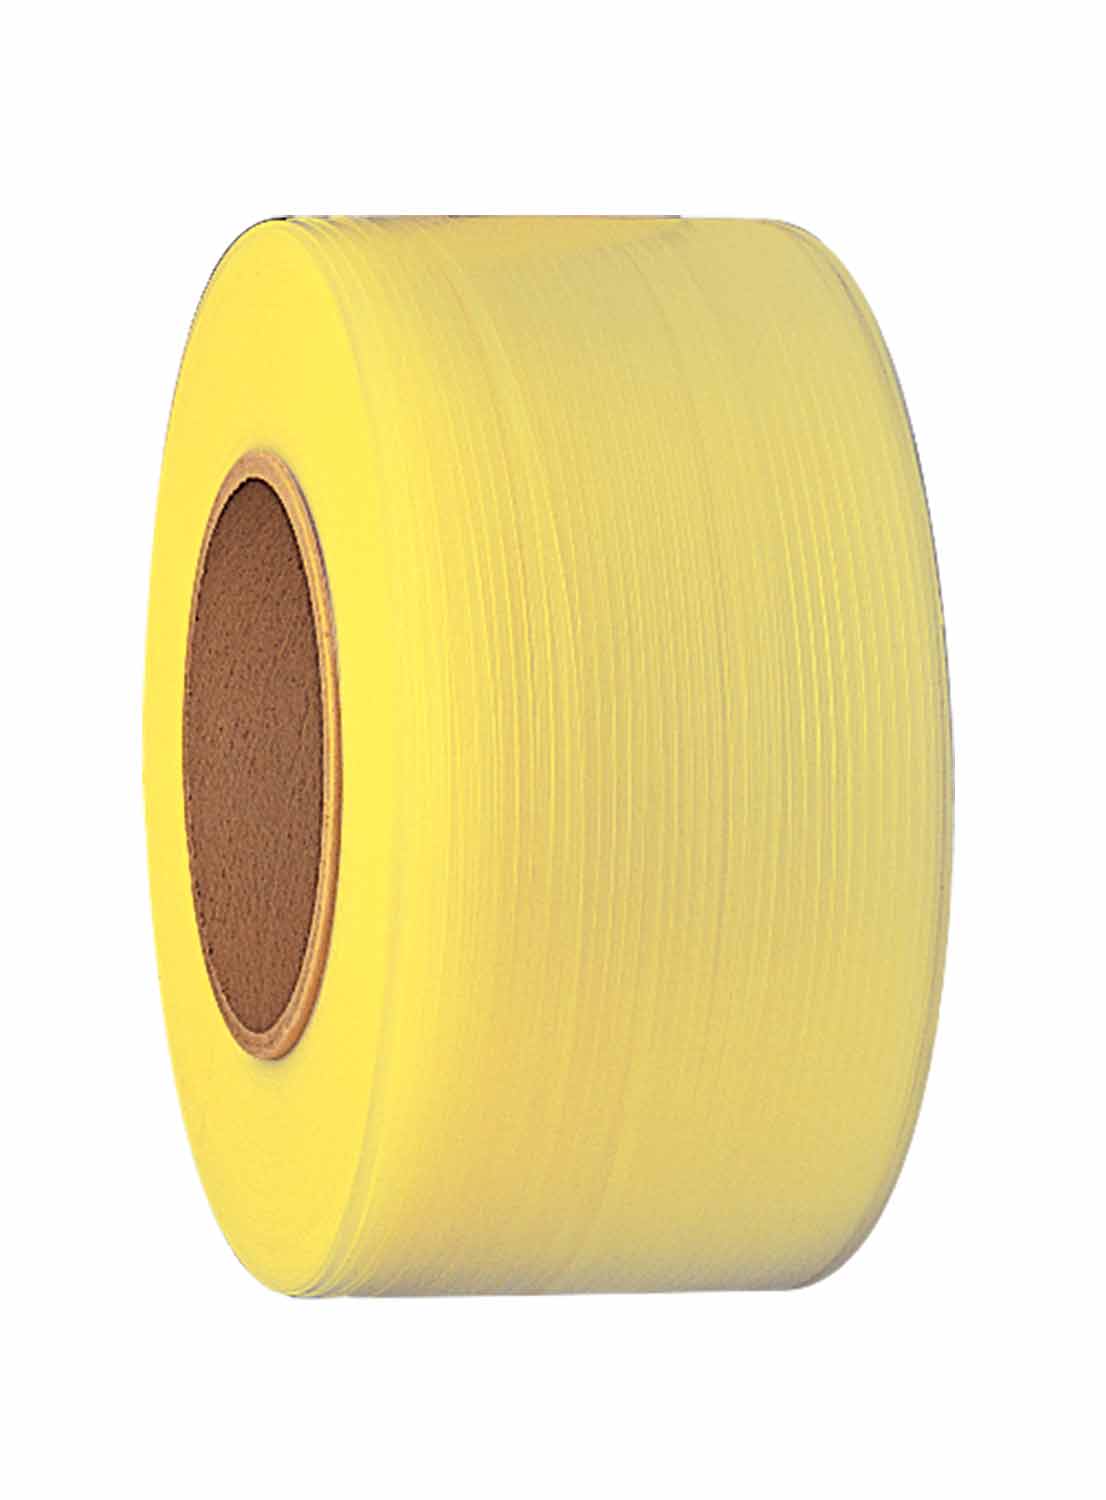 PLASTIC STRAPPING YELLOW 1/4&quot;
(6mm) 200 LB. 8X8
POLYPROPYLENE
SIGNODE CONTRAX